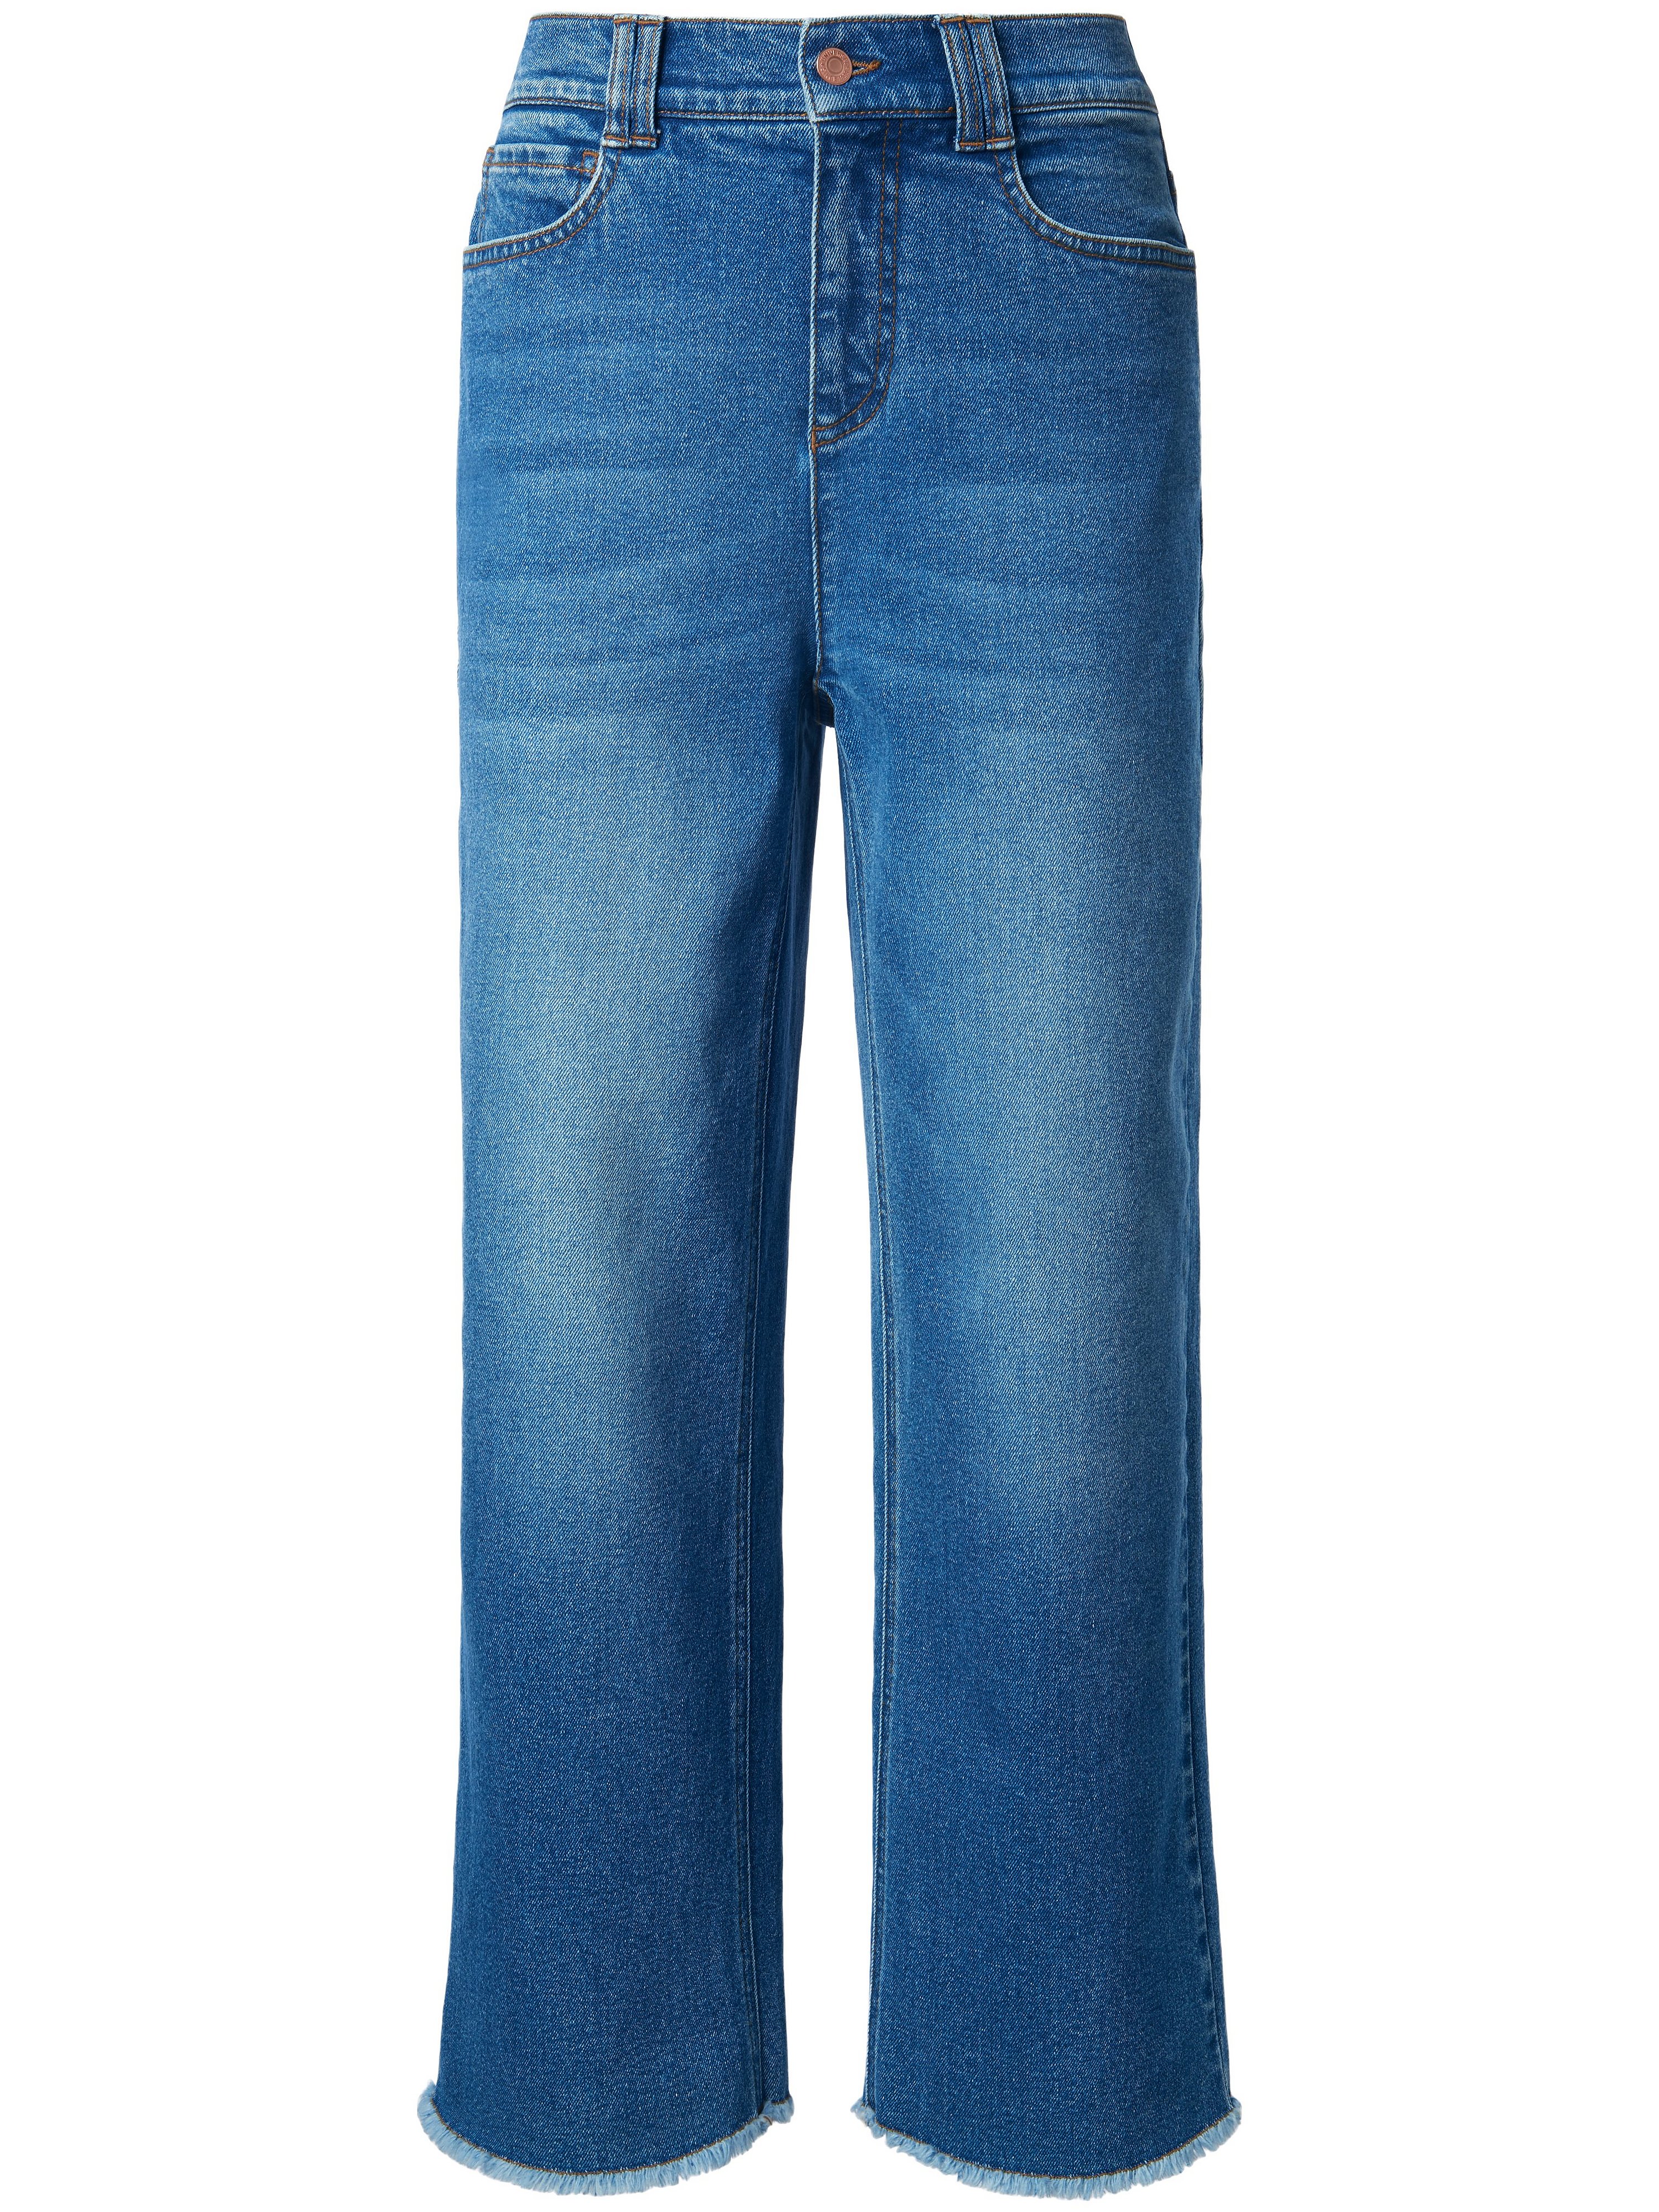 Le jean Wide Leg coupe 5 poches  DAY.LIKE denim taille 40